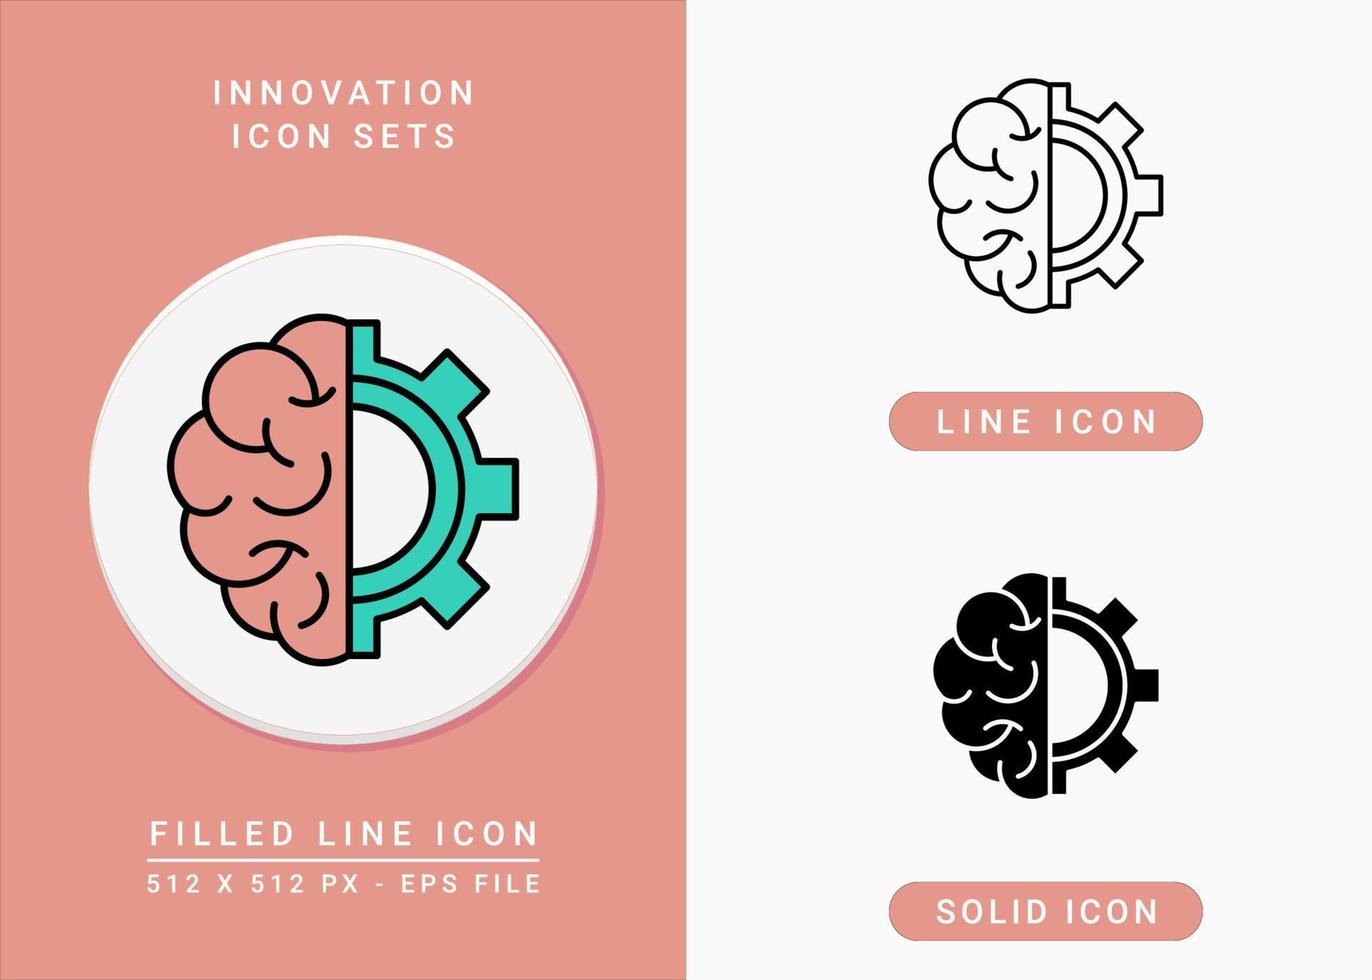 Innovation icons set vector illustration with solid icon line style. Gear and brain symbol. Editable stroke icon on isolated background for web design, user interface, and mobile app